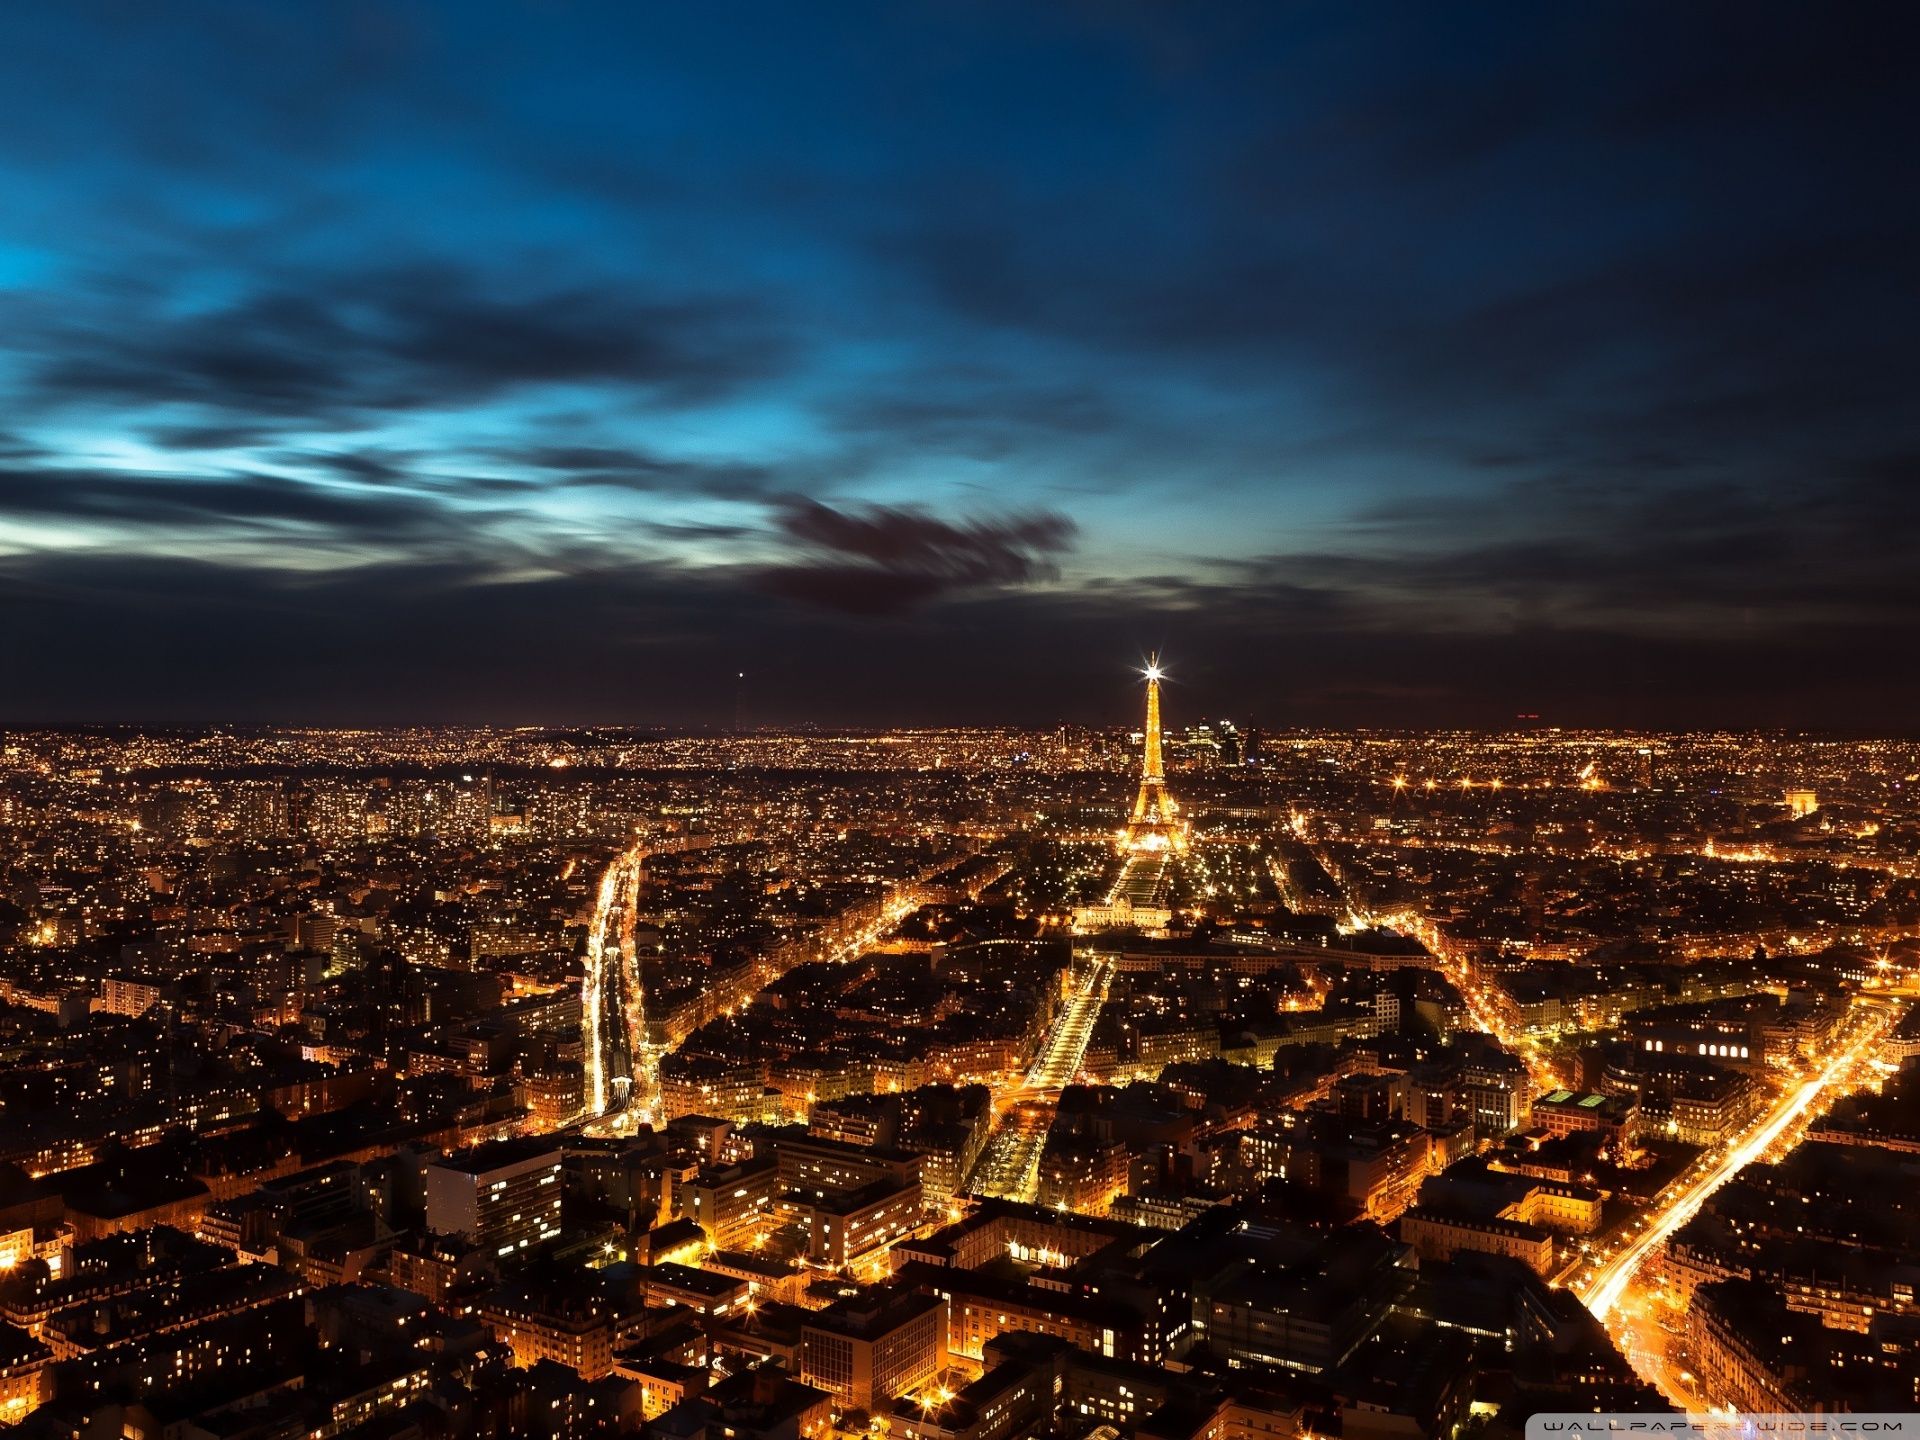 The eiffel tower and city lights at night - Paris